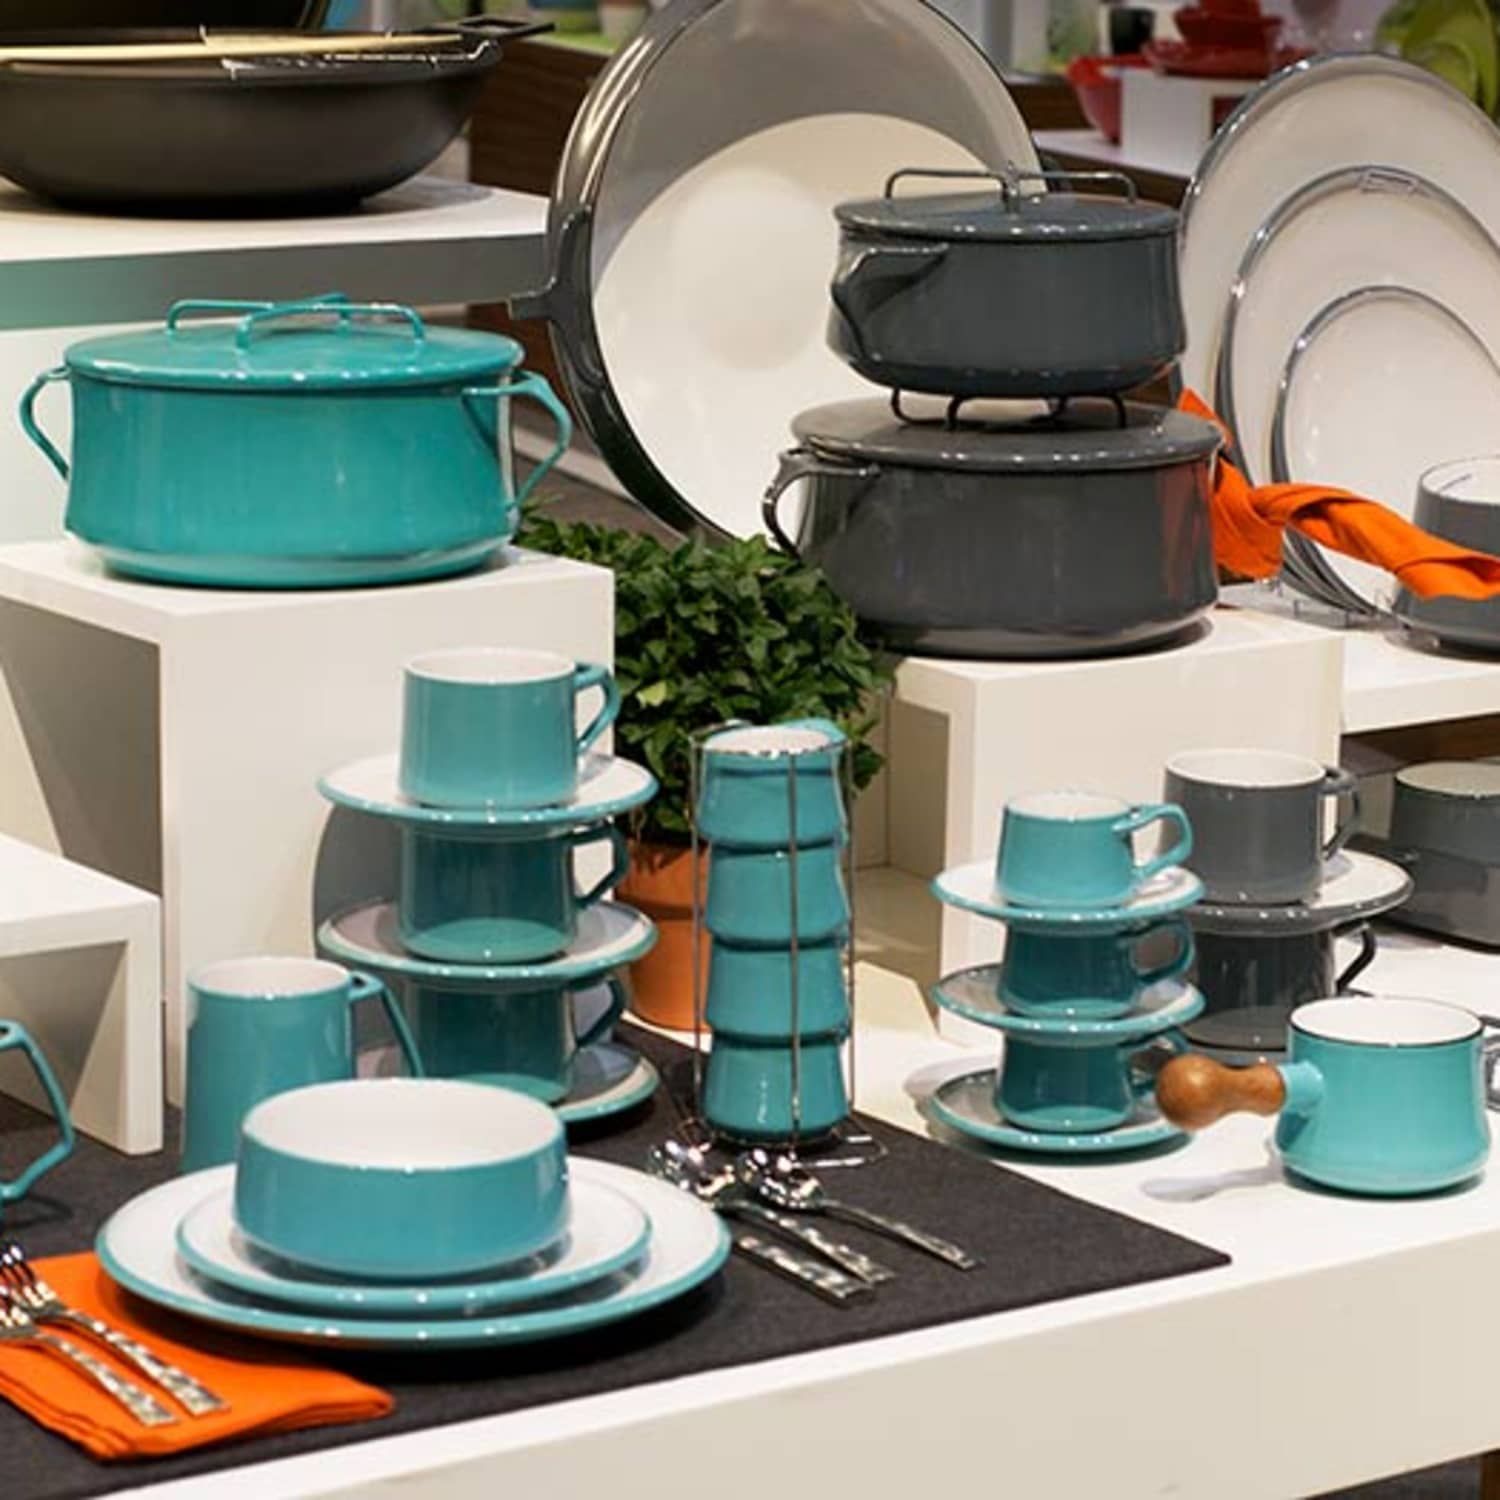 New Colors (and Teacups!) for Reissued Dansk Kobenstyle Cookware